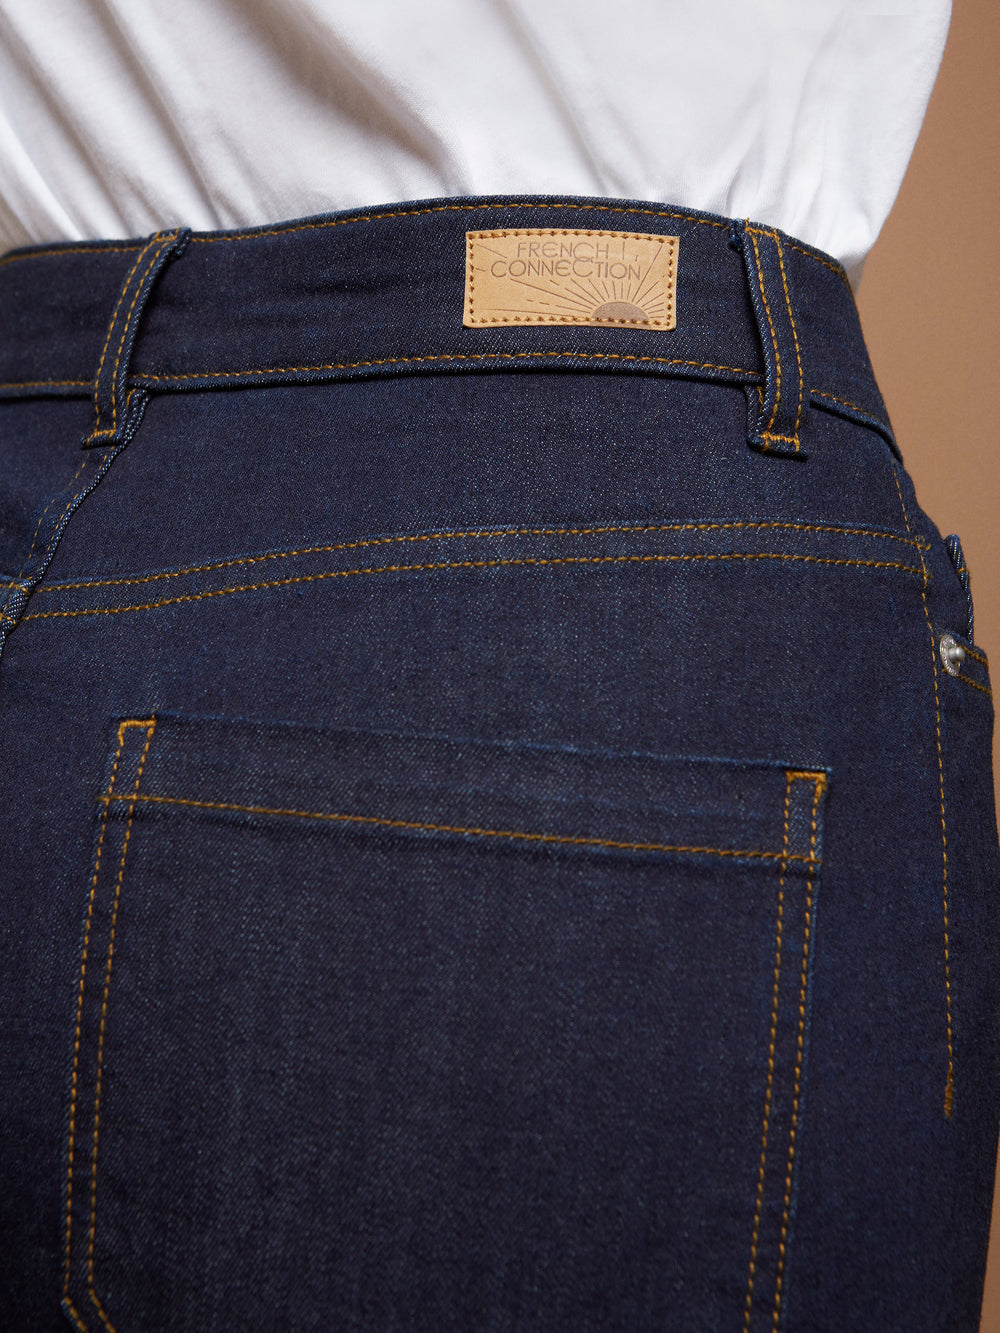 Stretch | US Denim Indigo Wide Jeans Connection French Clean